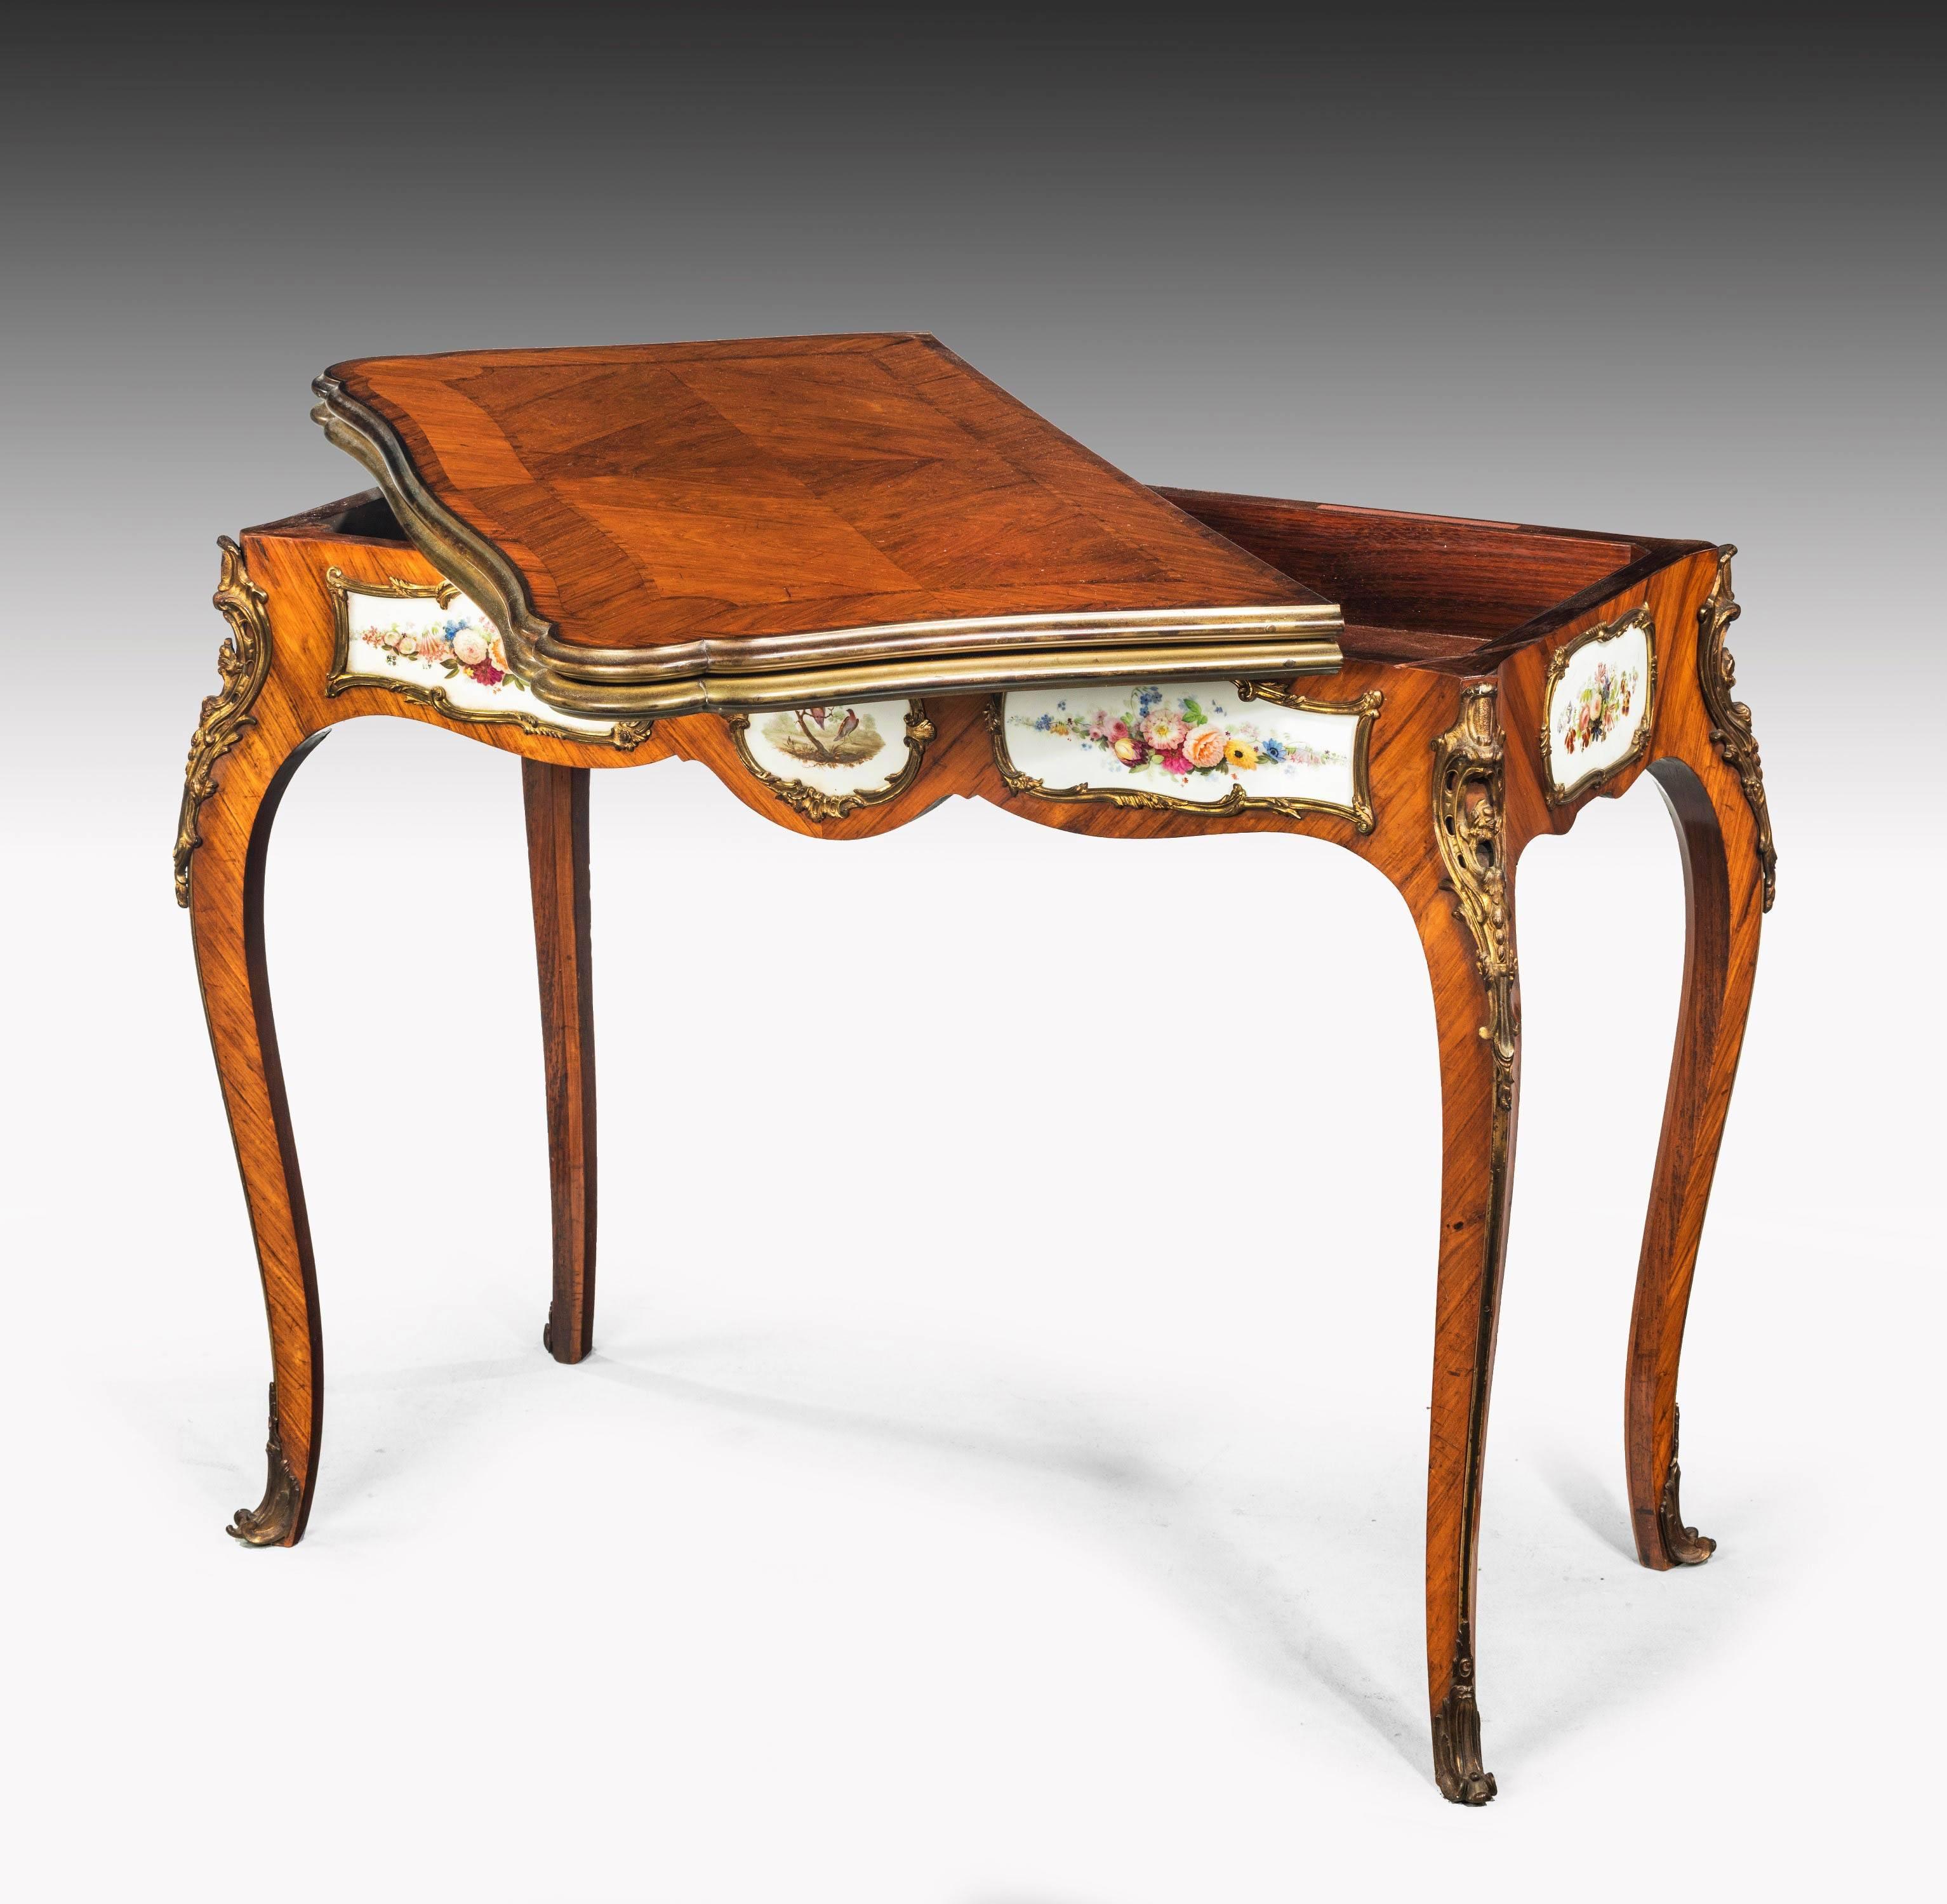 English Late 19th Century Kingwood Games Table Incorporating Beautifully Painted Panels